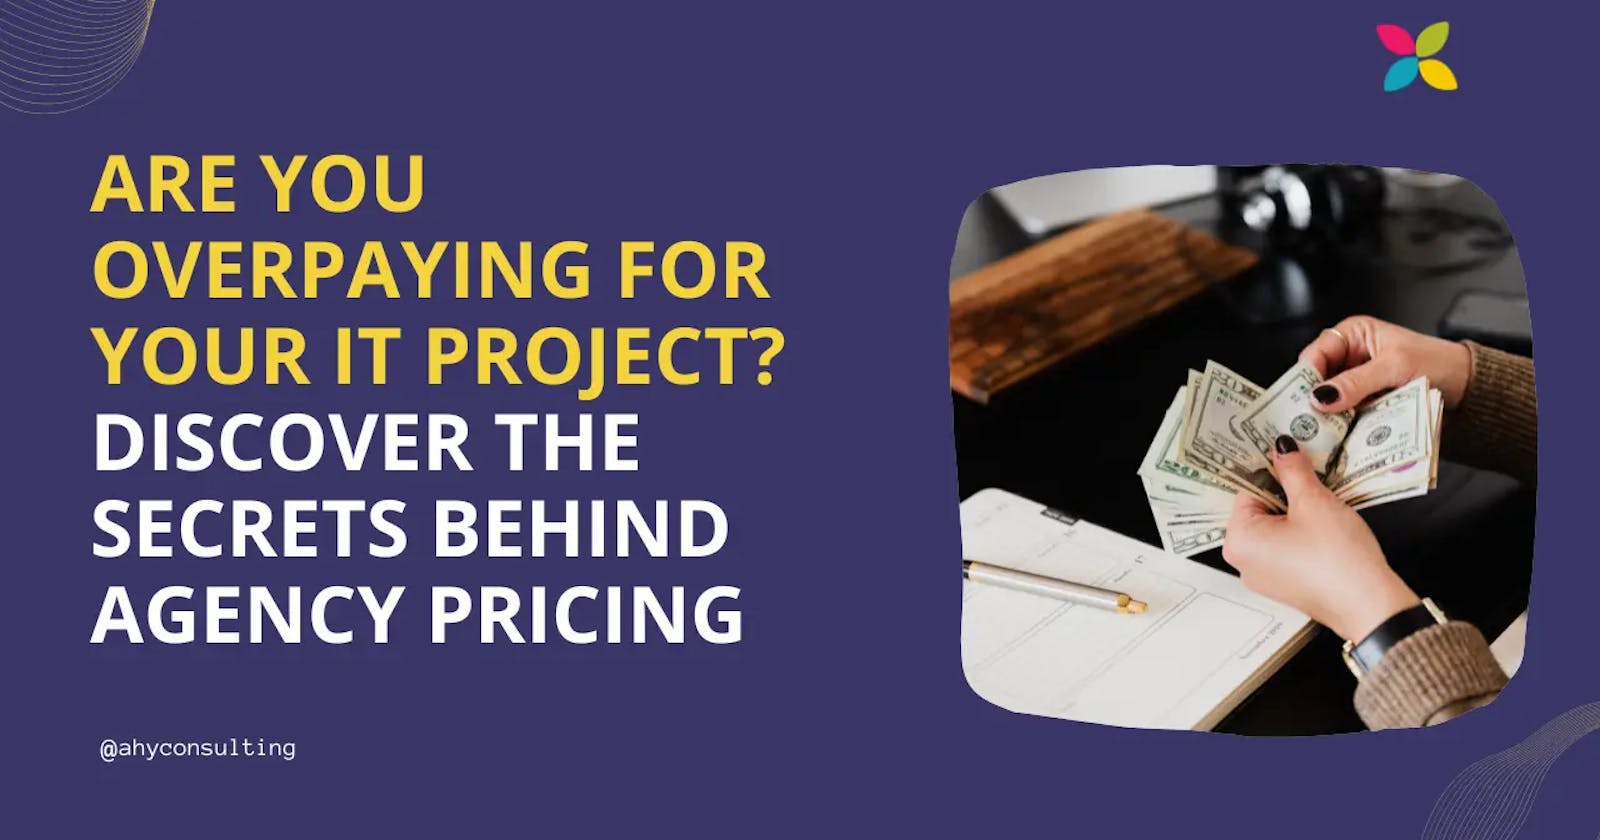 Are You Overpaying for Your IT Project? Discover the Secrets Behind Agency Pricing.